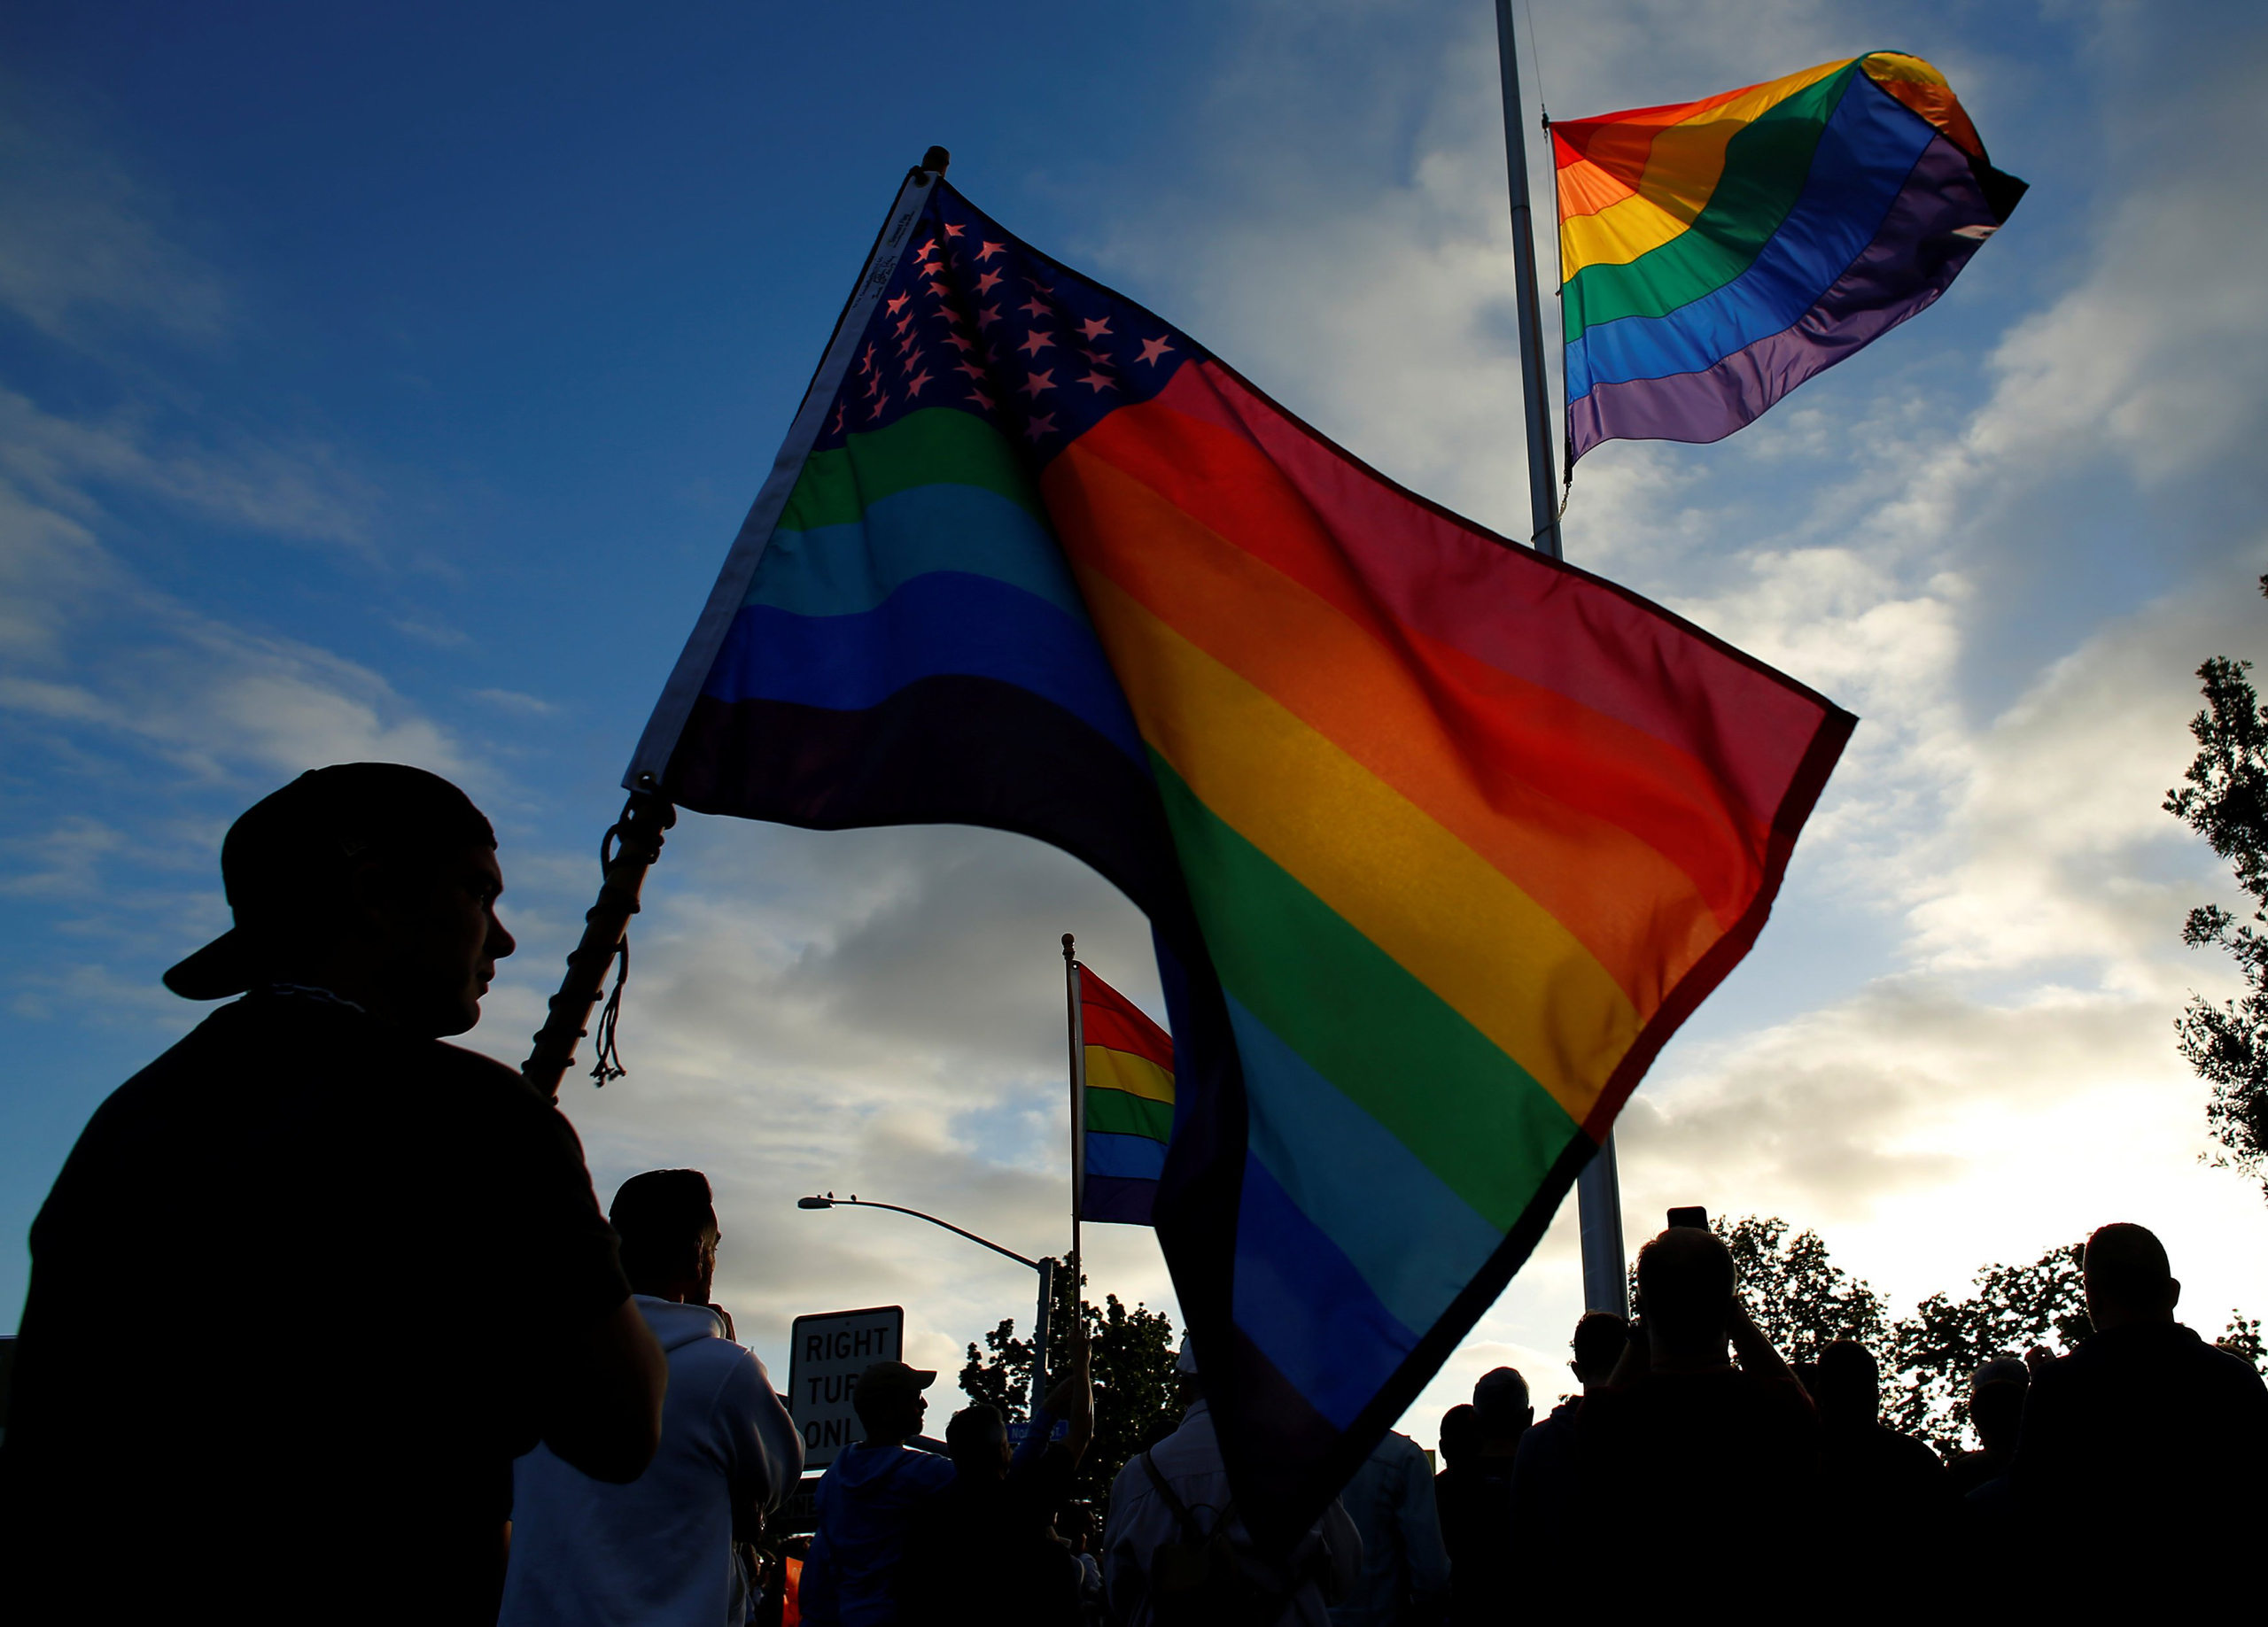 Mourners gather under an LGBT pride flag flying at half-mast for a candlelight vigil in remembrance for mass shooting victims in Orlando, in San Diego, Calif. on June 12, 2016. (Mike Blake—Reuters)